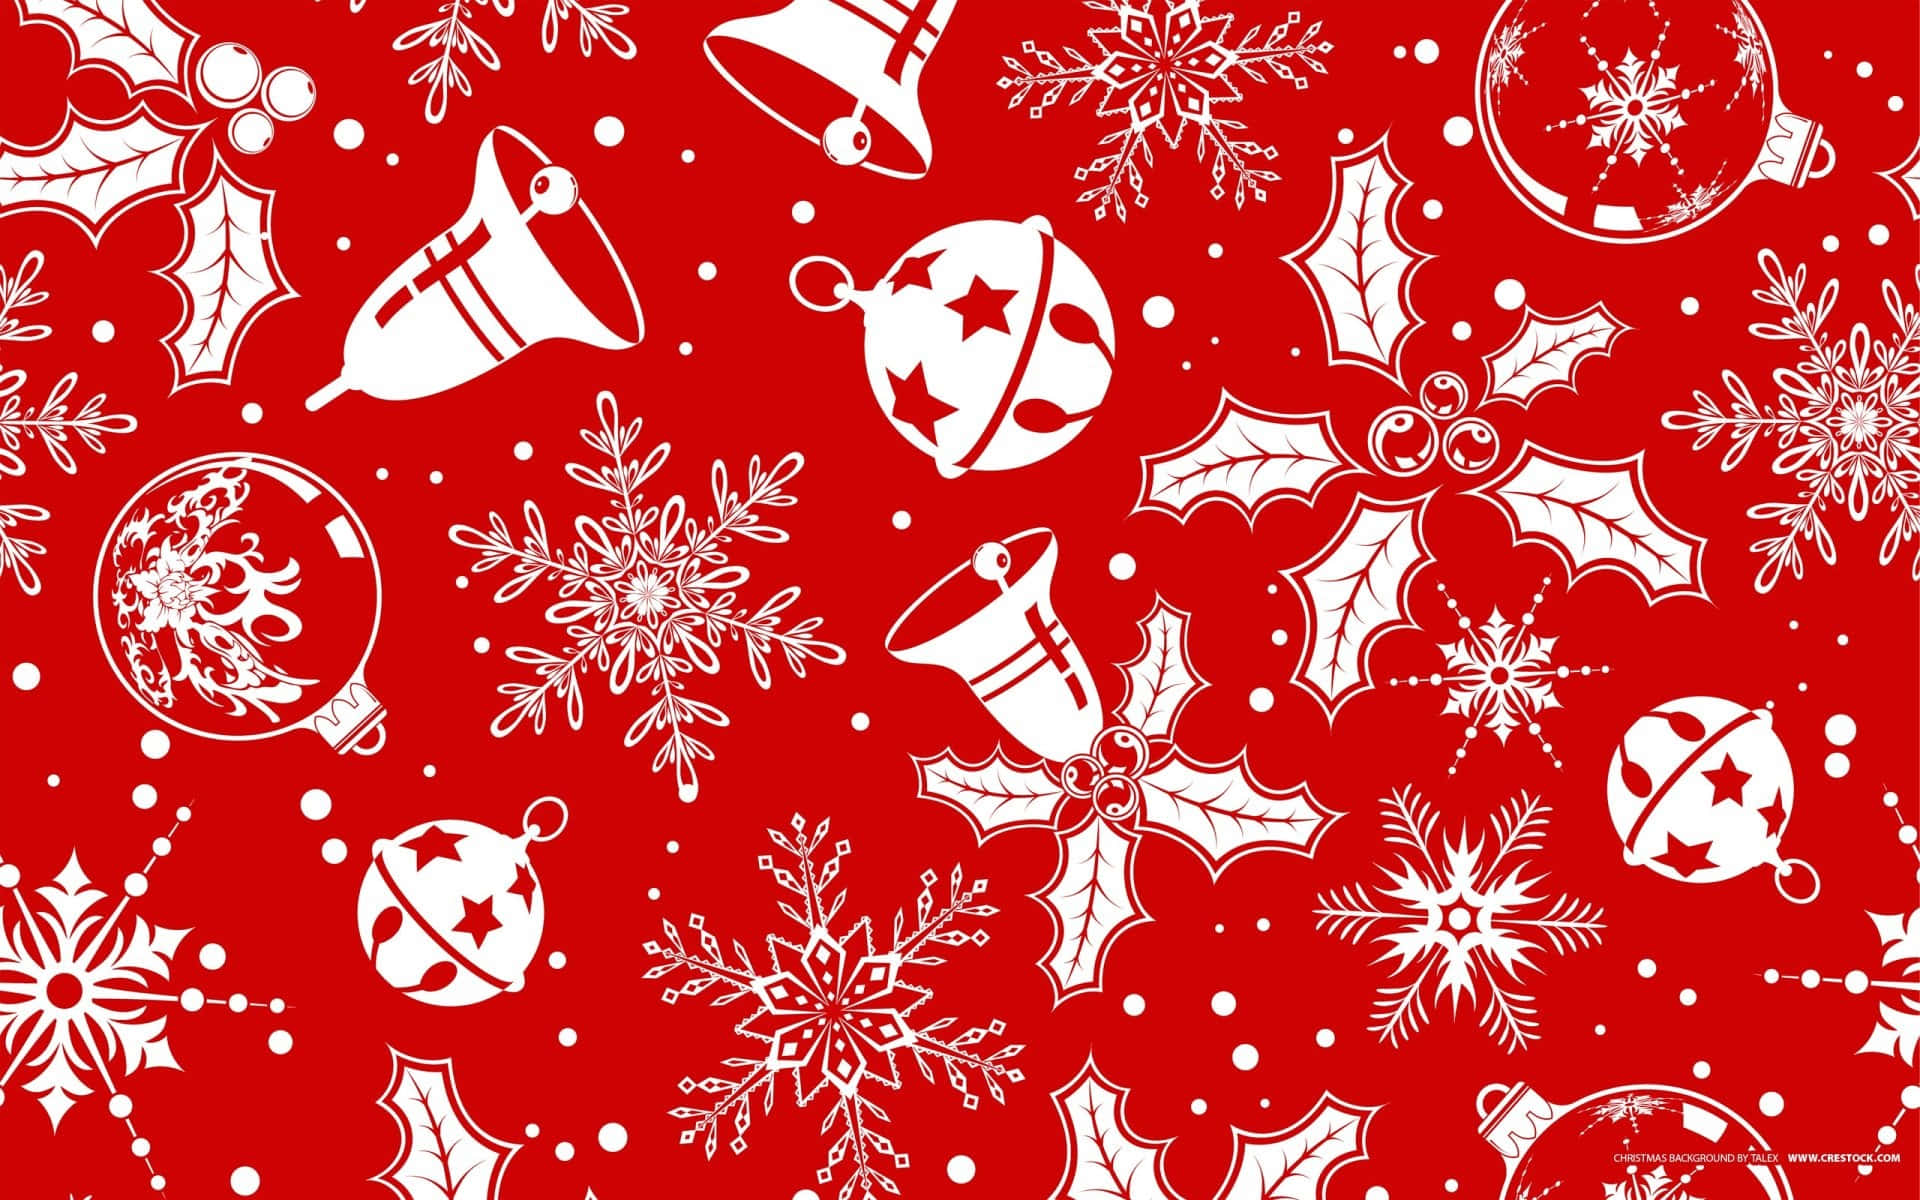 Celebrate The Holidays with a High Resolution Christmas Background